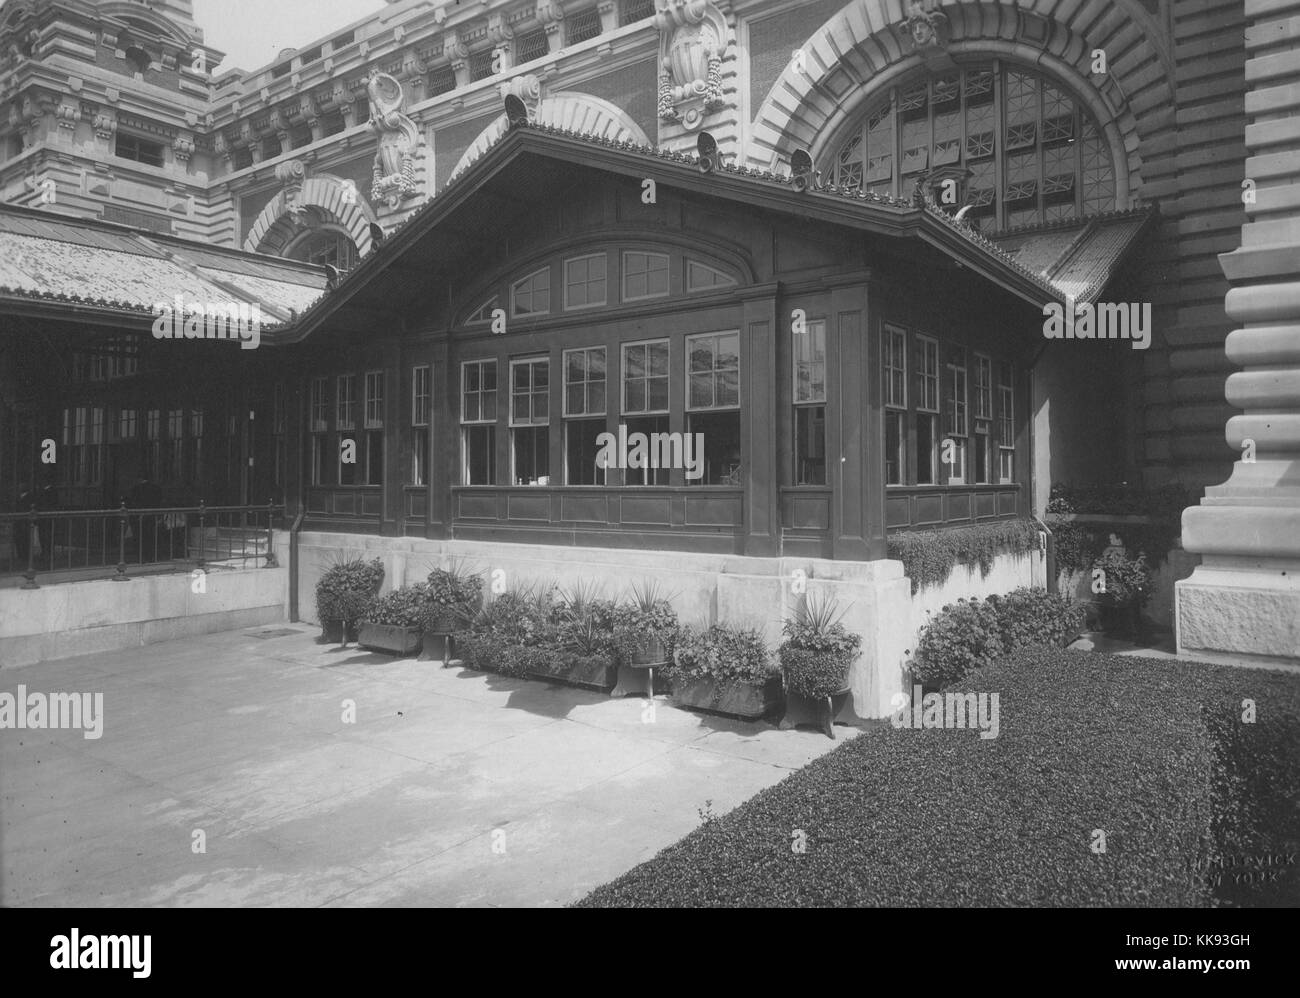 Black and white photograph showing detail from the front entrance of the United States Immigration Station at Ellis Island, by Edwin Levick, Ellis Island, New York, 1907. From the New York Public Library. Stock Photo